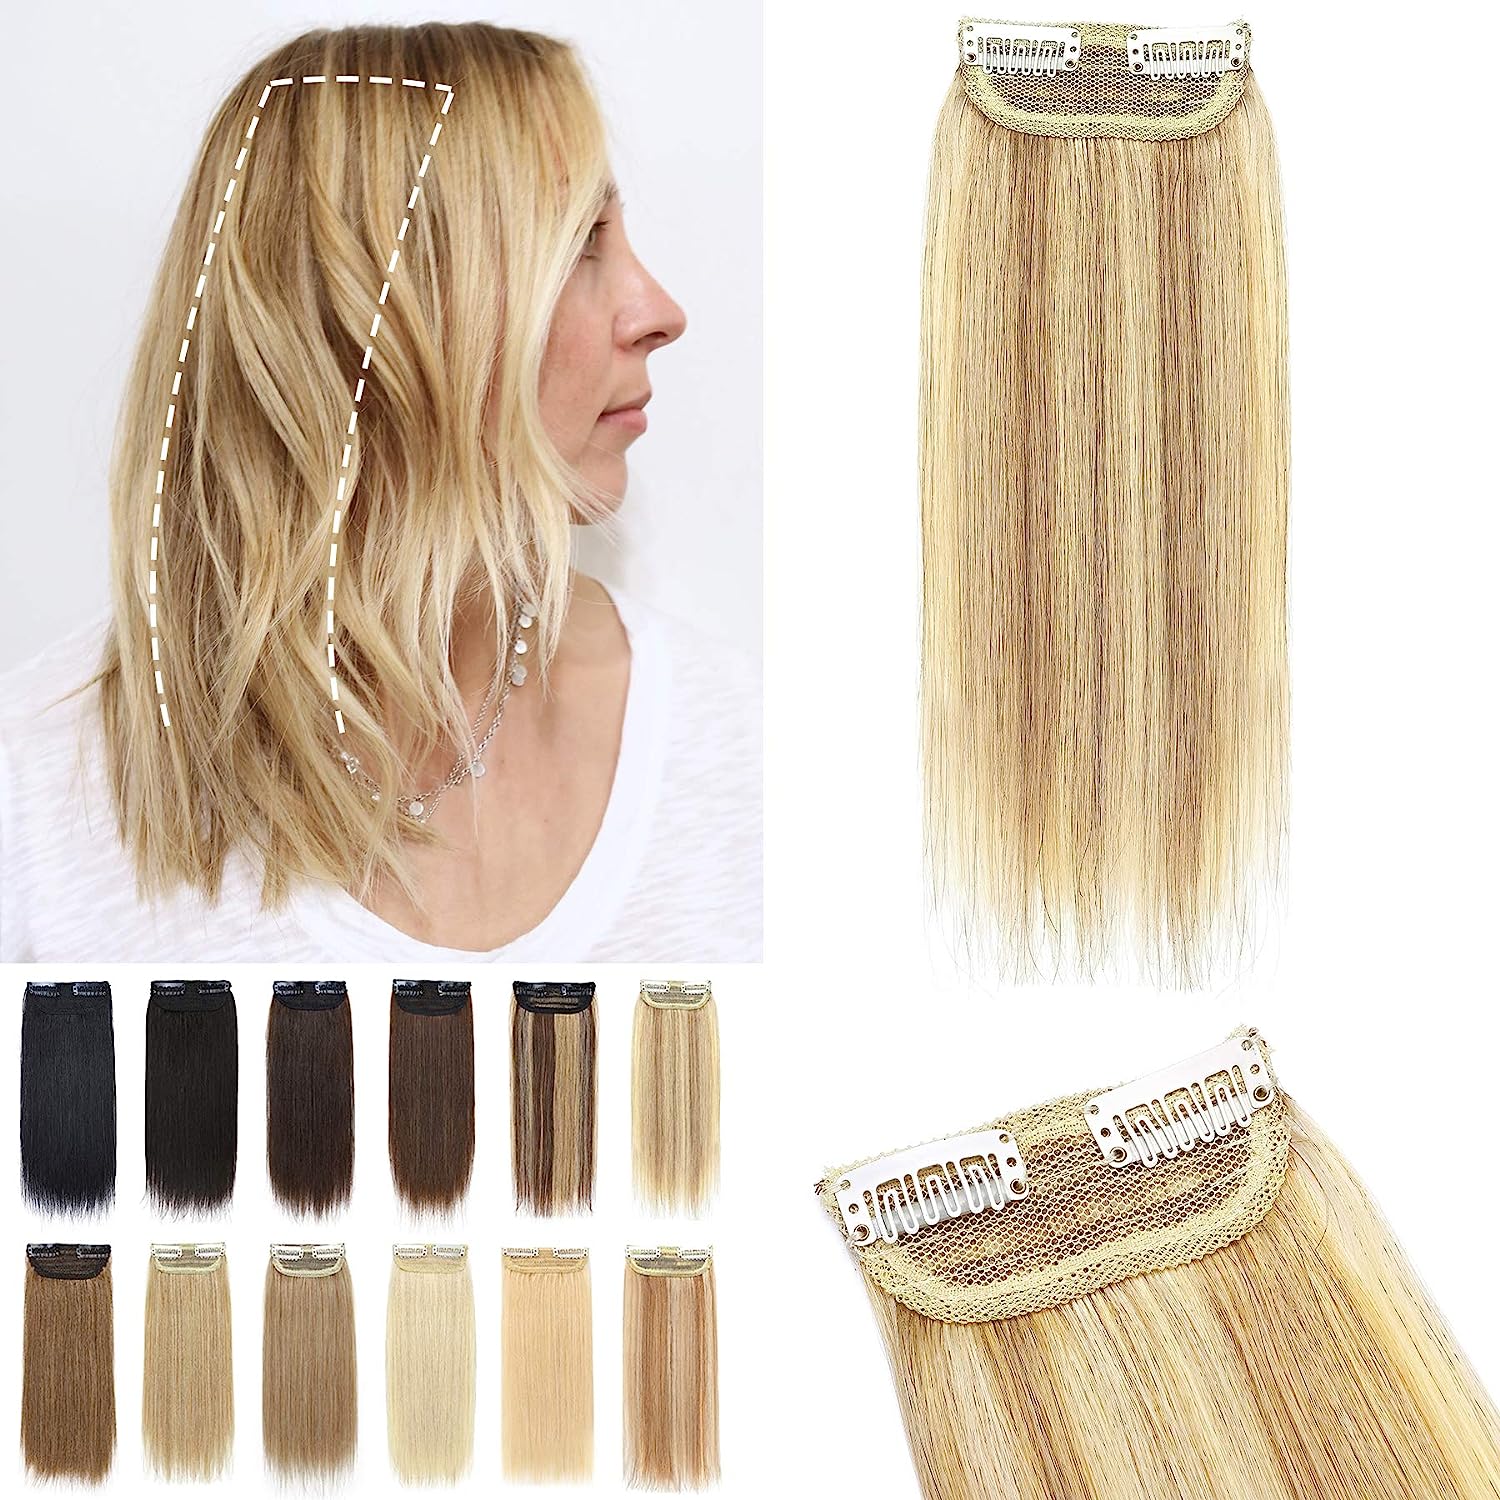 Human Hair strips  clip extensions 1piece - VIP Extensions